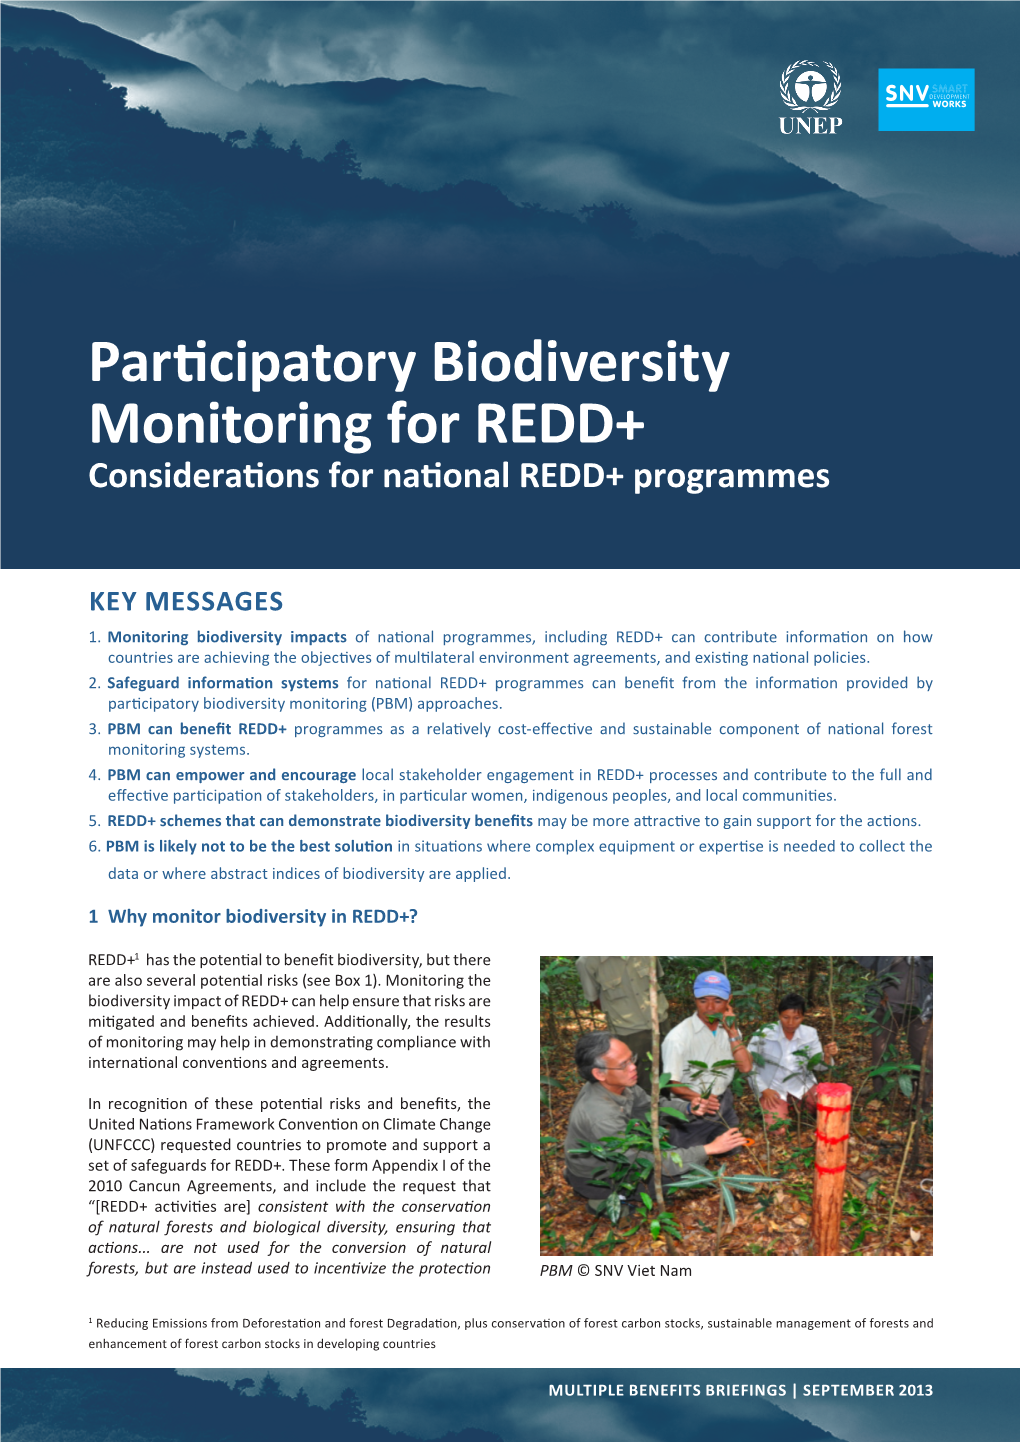 Participatory Biodiversity Monitoring for REDD+ Considerations for National REDD+ Programmes